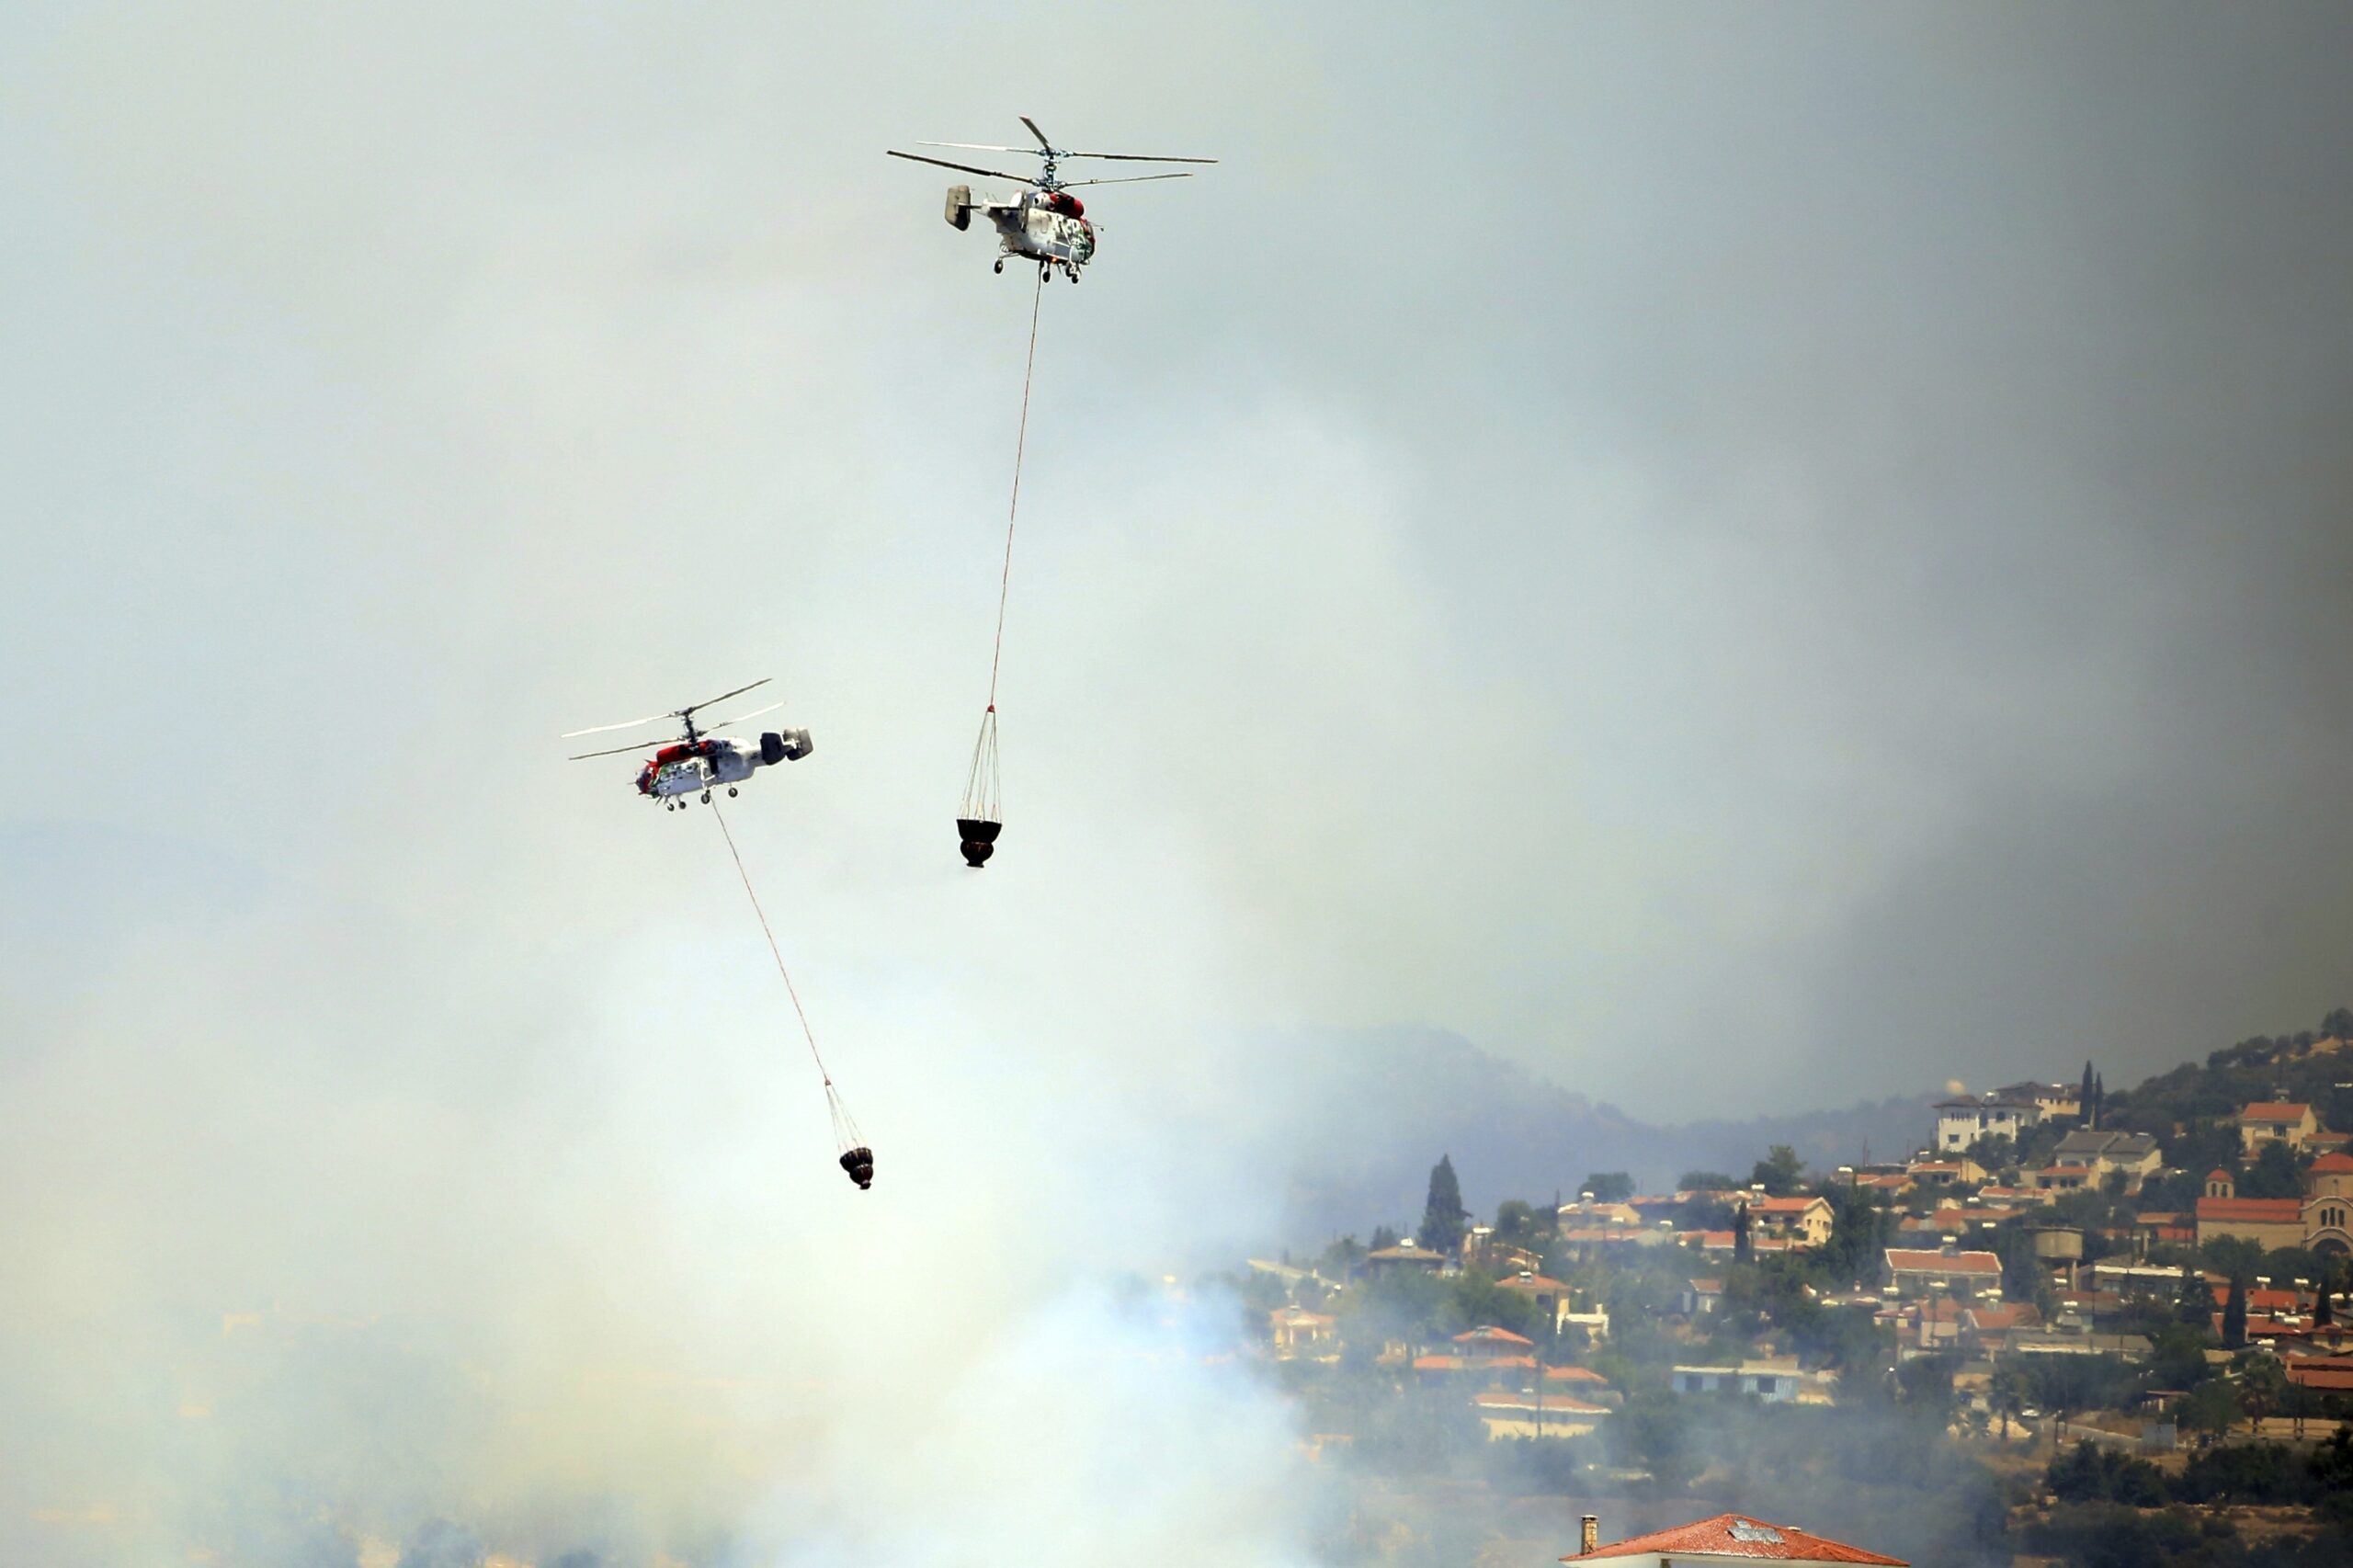 Jordan stations 2 firefighting helicopters in Cyprus to help as summer fire season arrives image